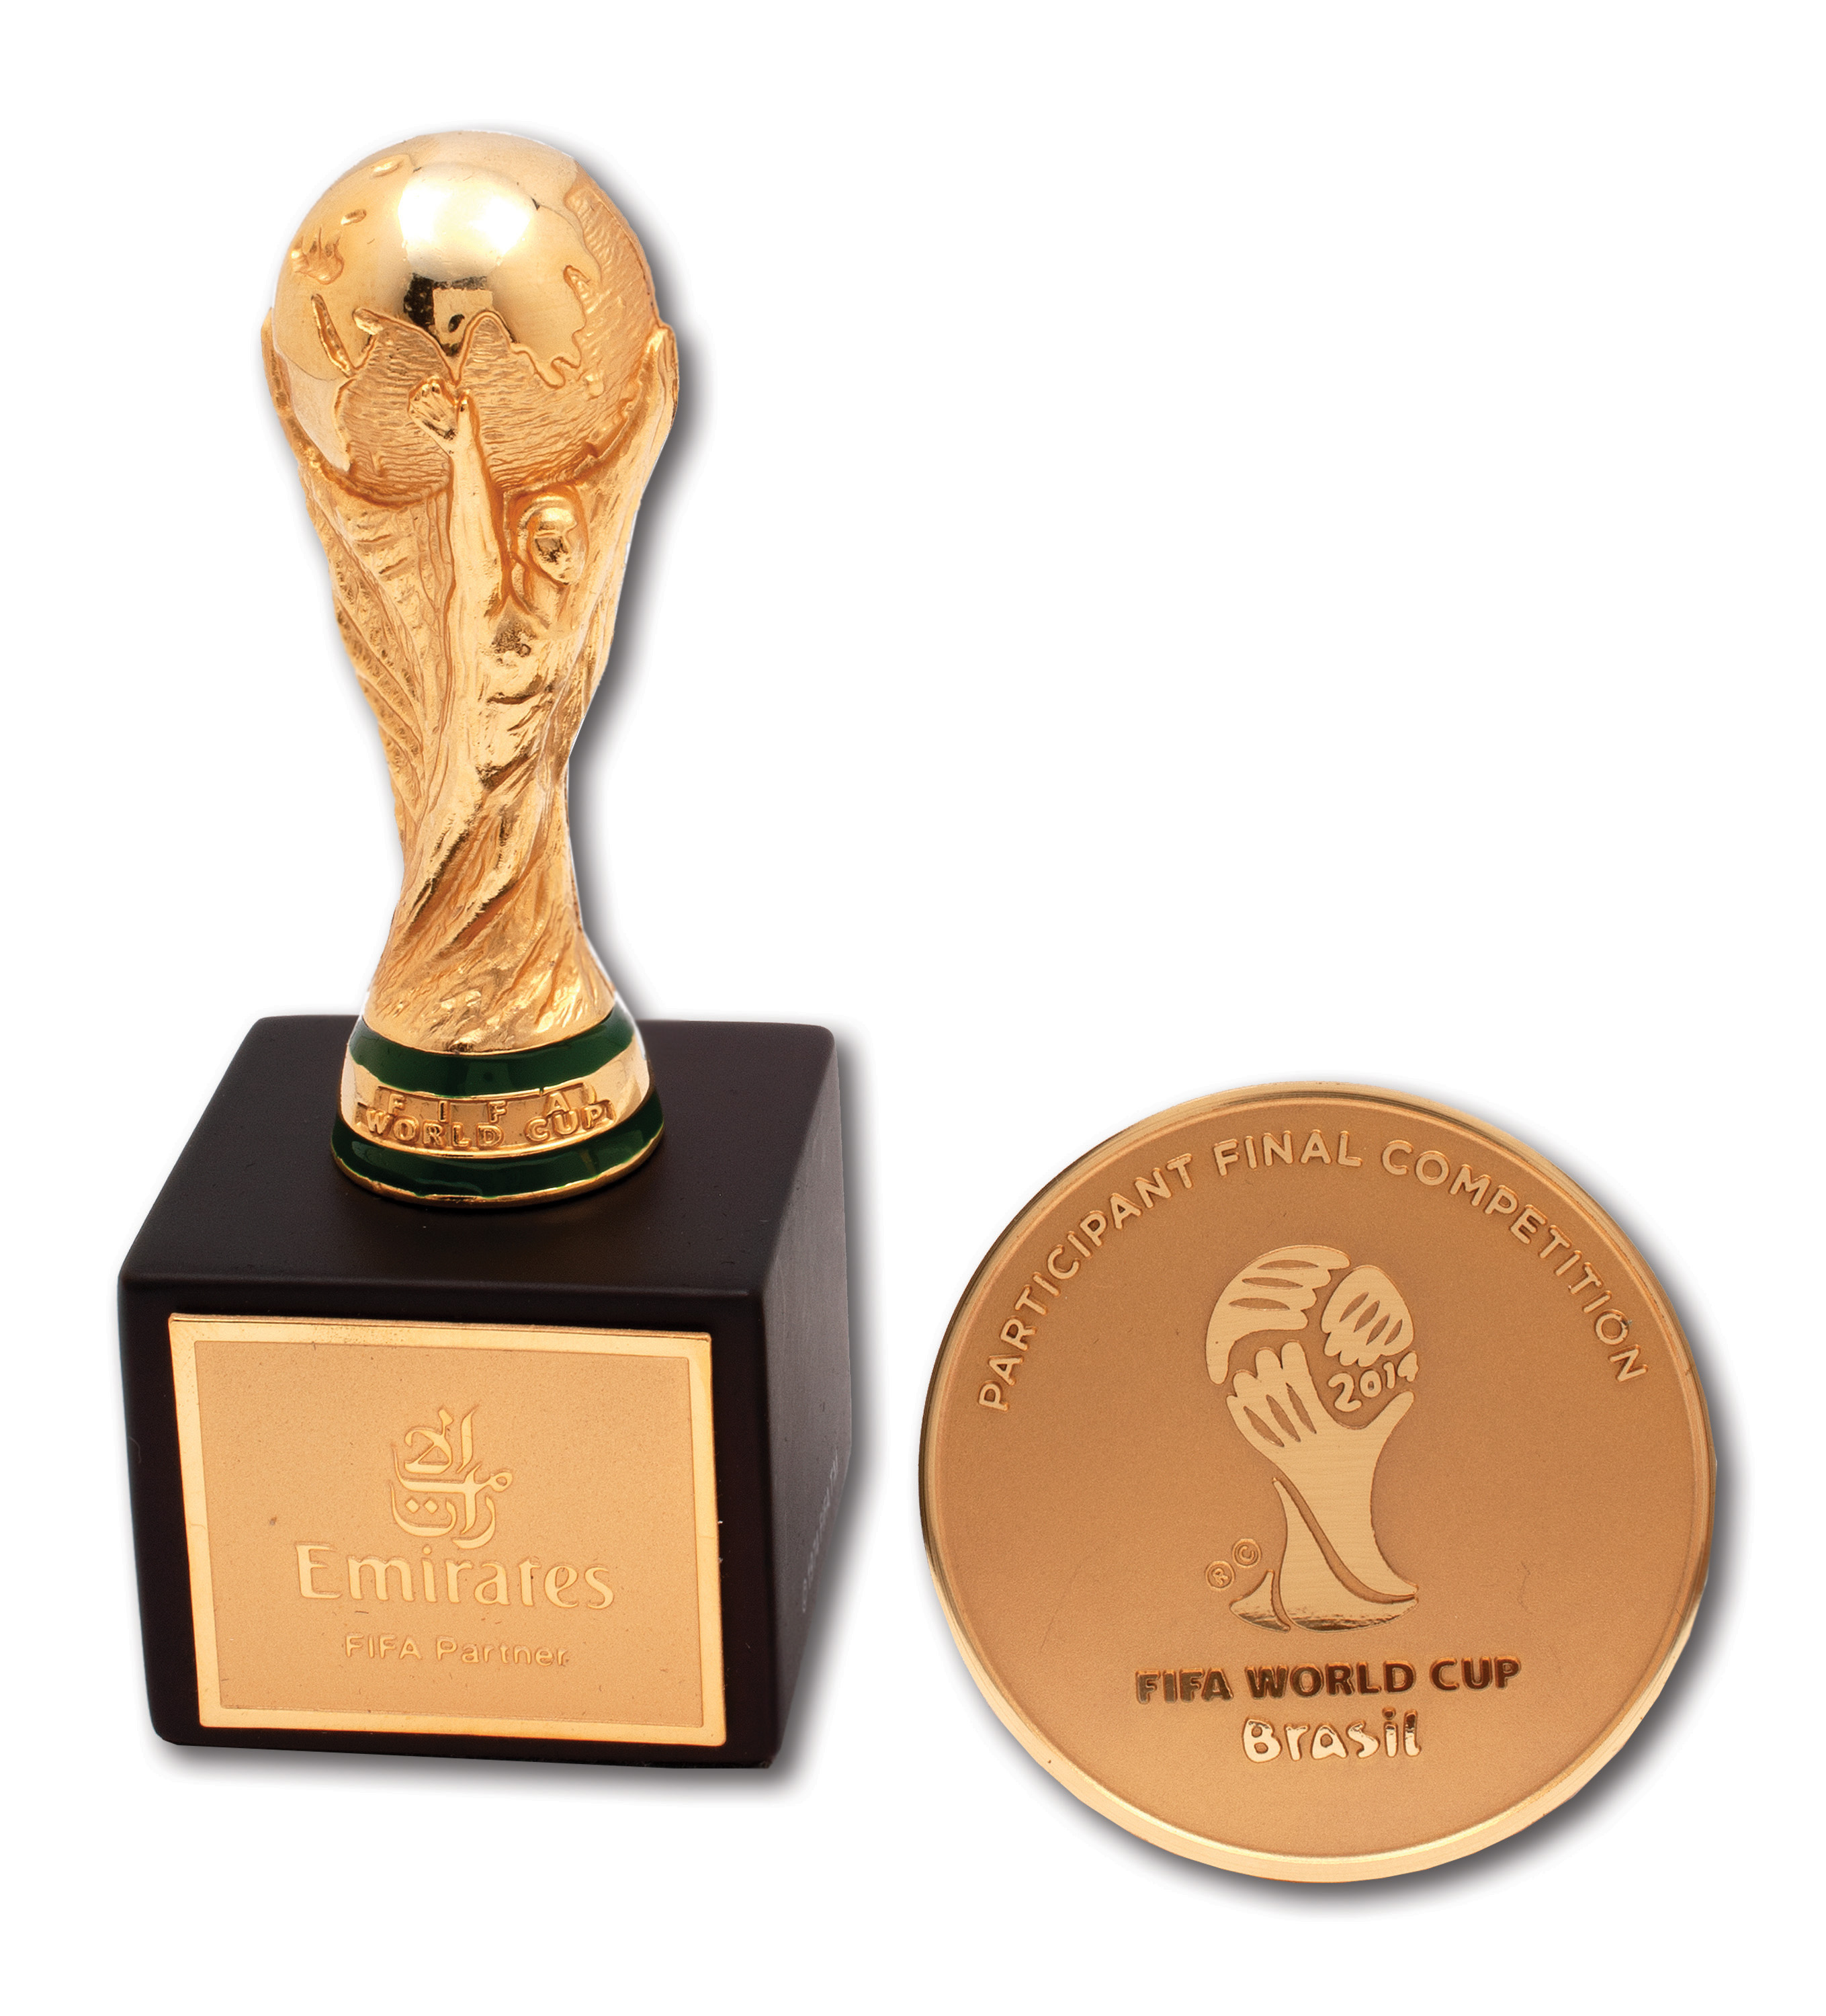 FIFA World cup 2014 Final and Simi Final trophies